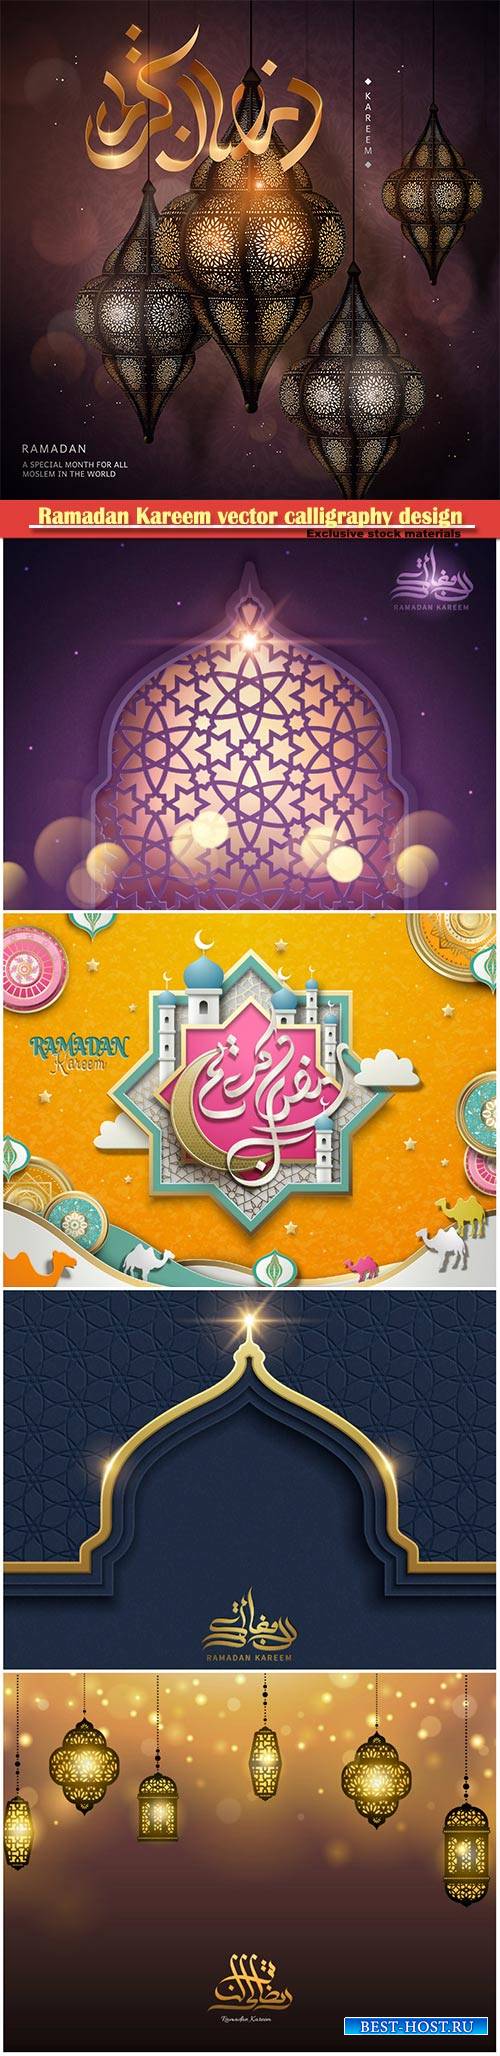 Ramadan Kareem vector calligraphy design with decorative floral pattern,mosque silhouette, crescent and glittering islamic background # 15